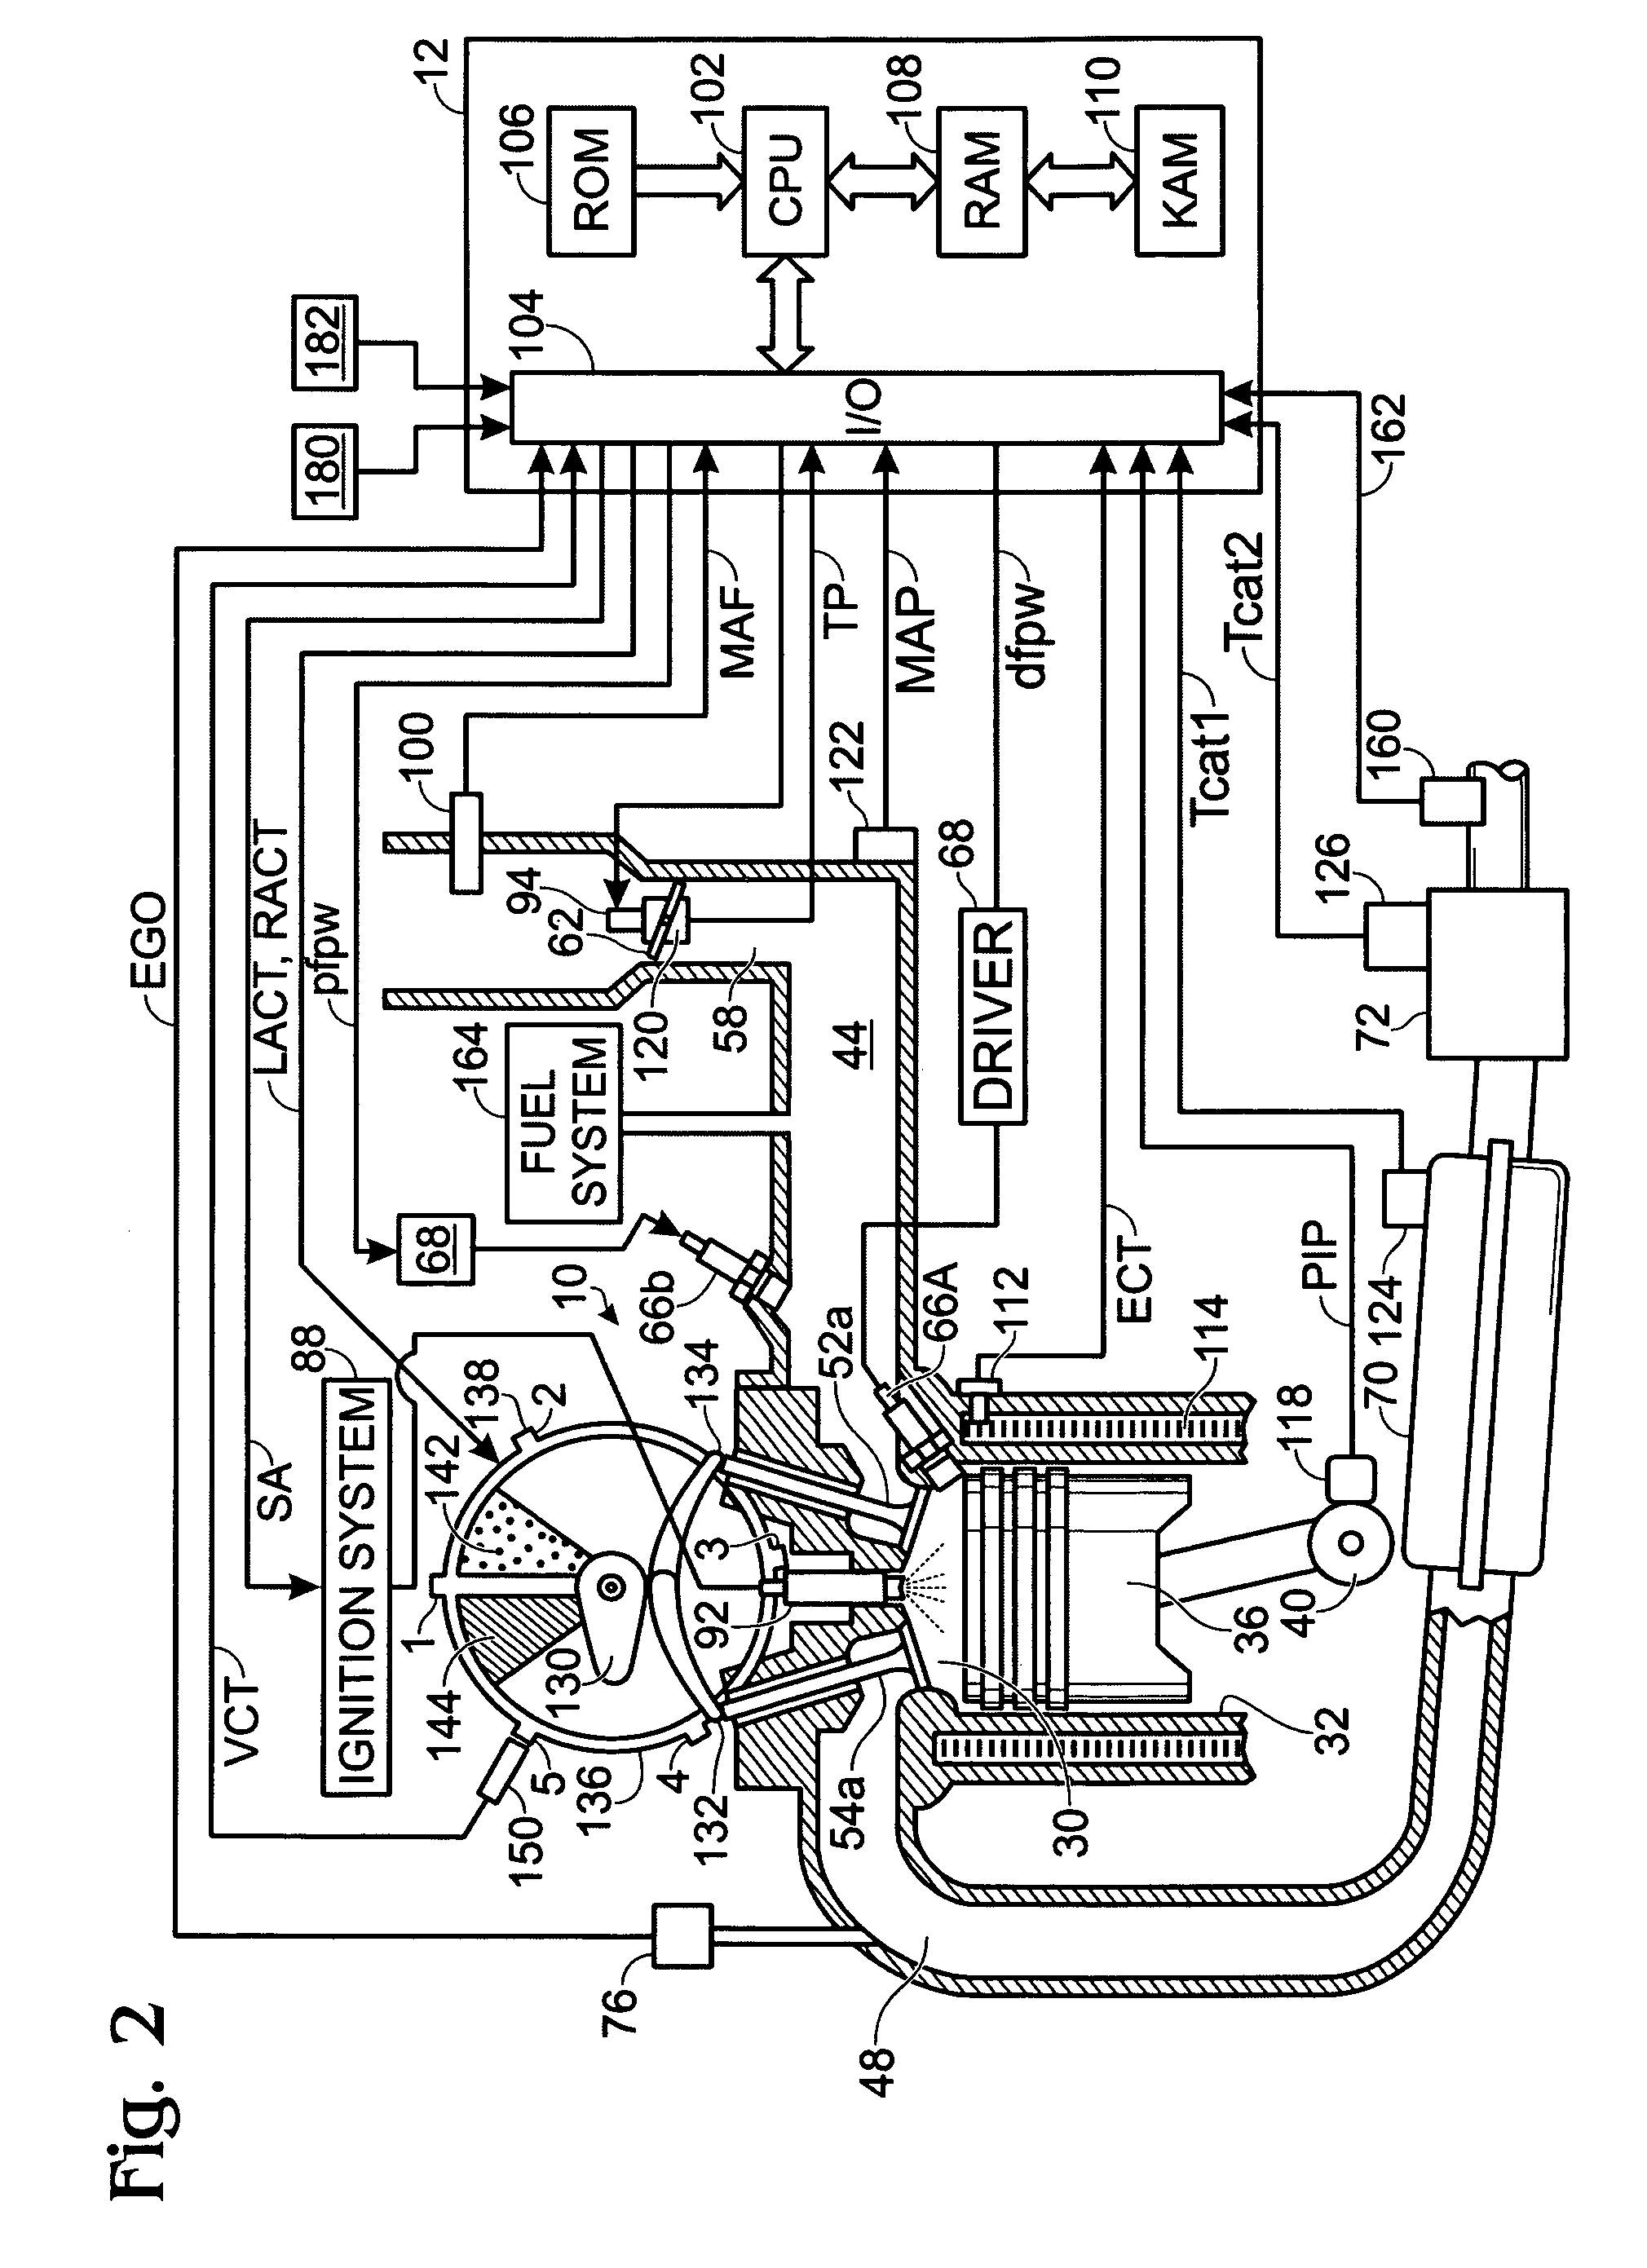 System and method for engine air-fuel ratio control